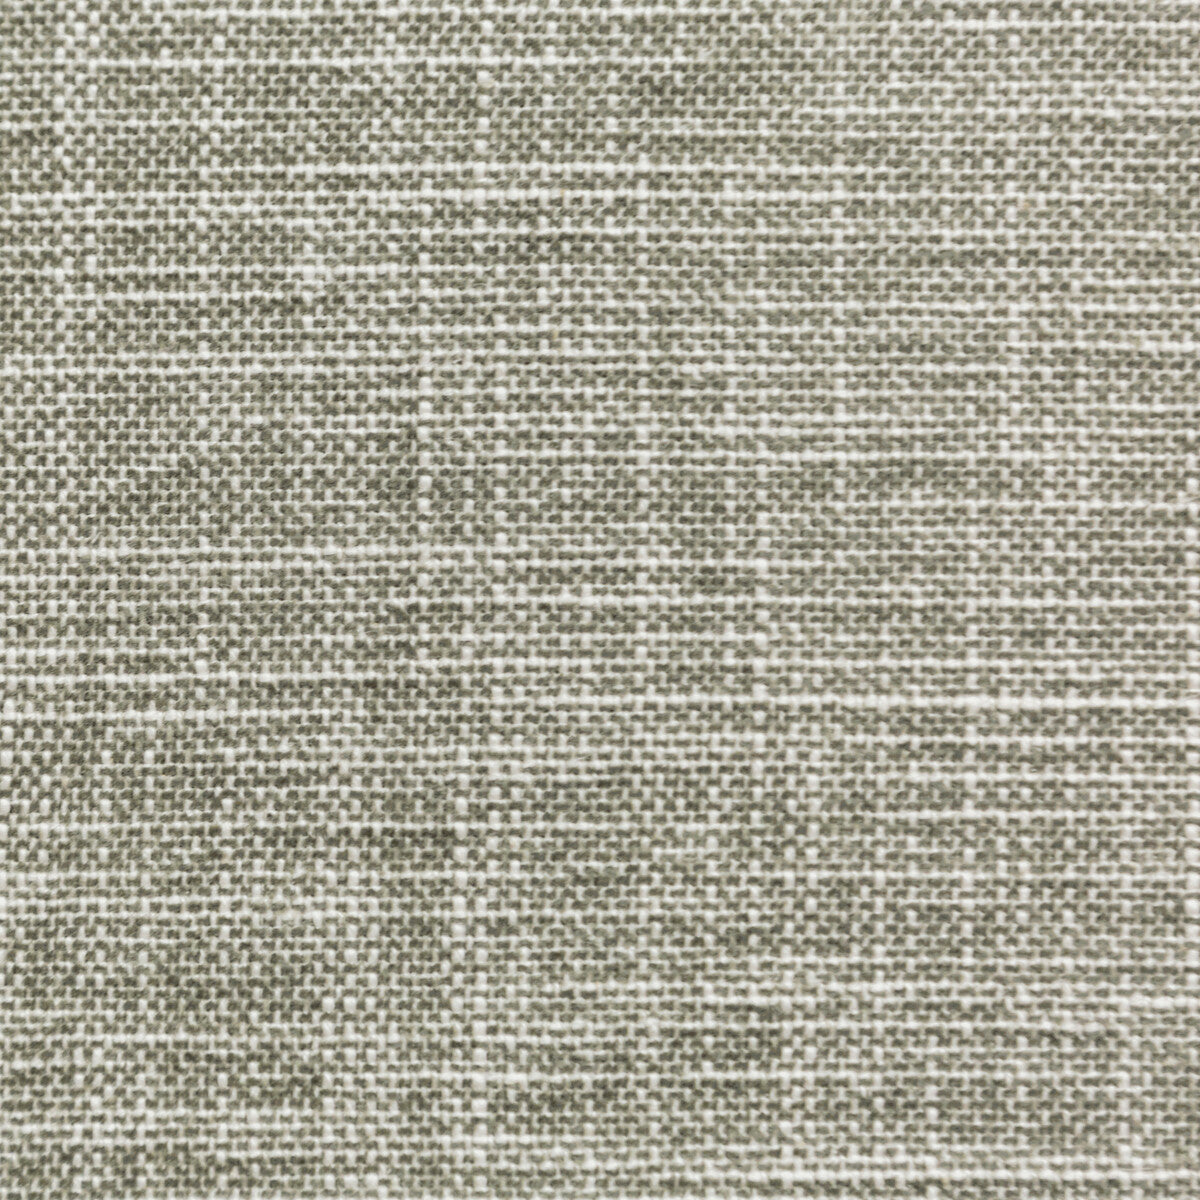 Okanda fabric in stone color - pattern 35768.21.0 - by Kravet Smart in the Performance Kravetarmor collection